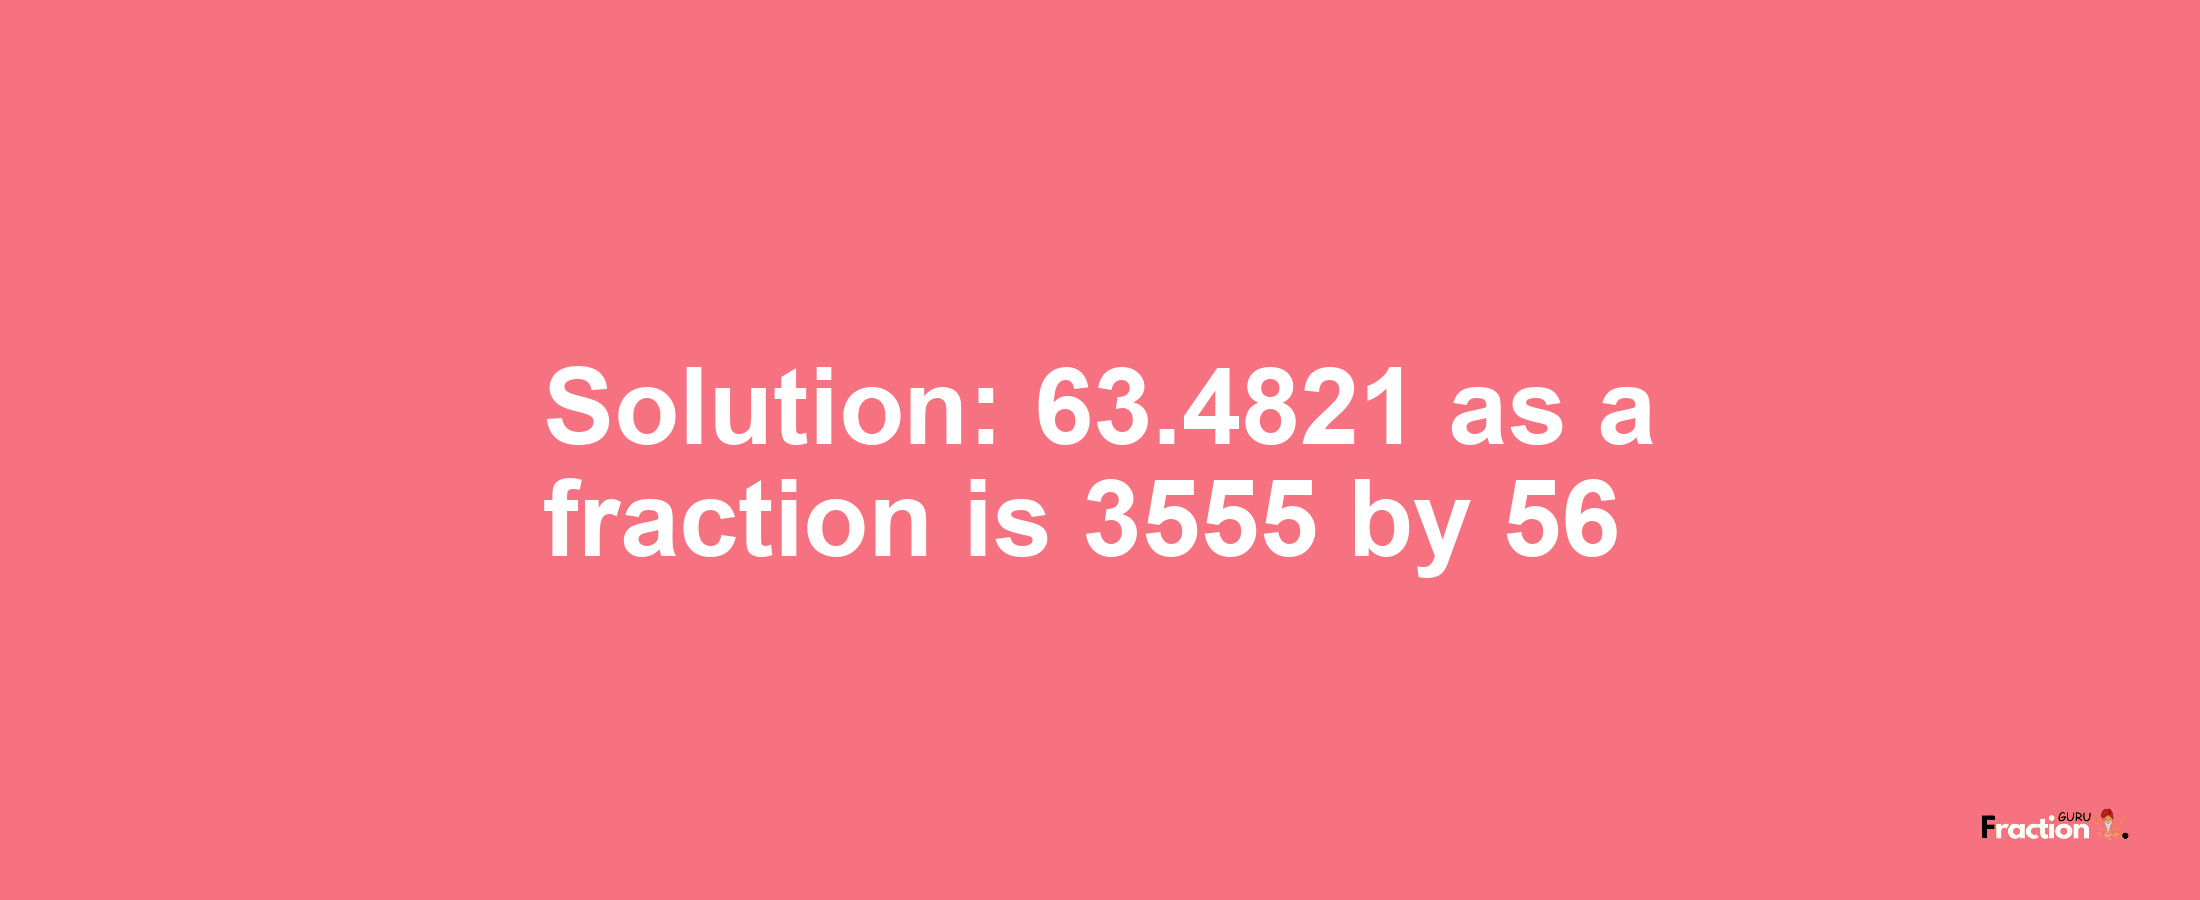 Solution:63.4821 as a fraction is 3555/56